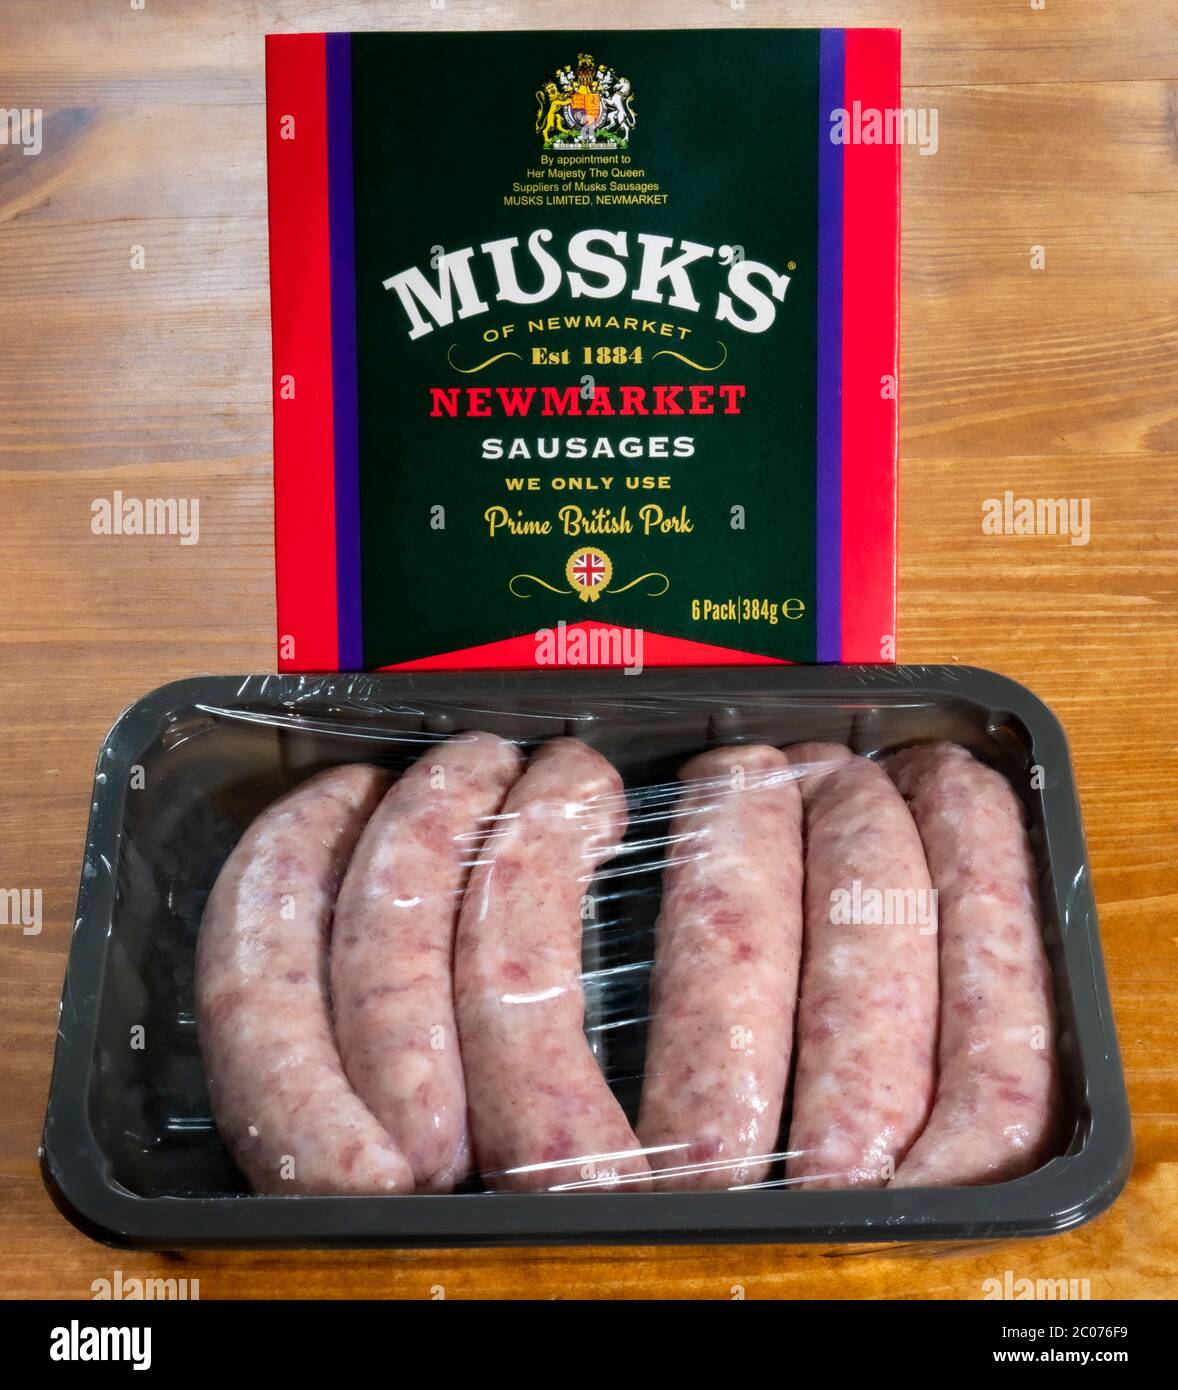 Musk’s Newmarket Sausages. Cellophane covered tray of six uncooked prime British pork sausages, in front of the Musk's cardboard sleeve. Stock Photo